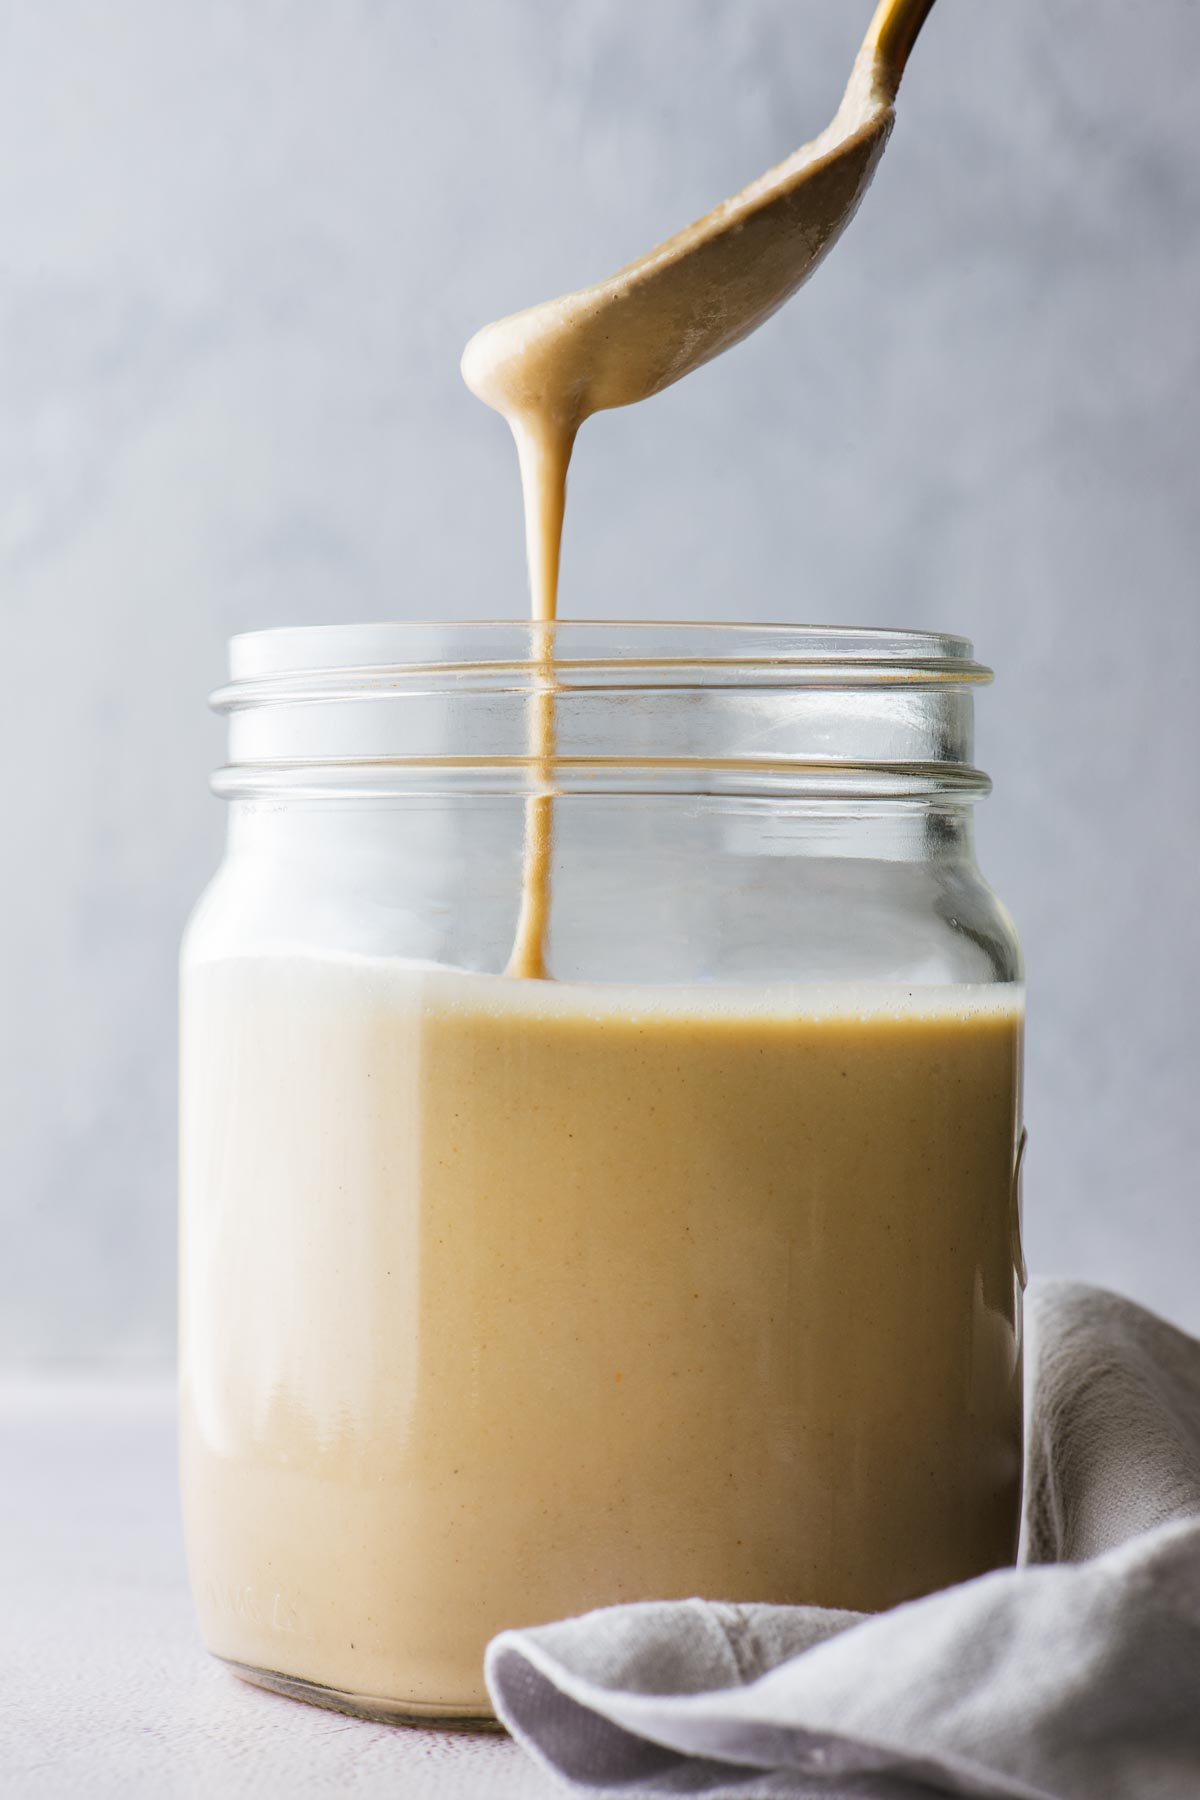 A side angle view of a spoon drizzling homemade tahini into a mason jar against a grey background.